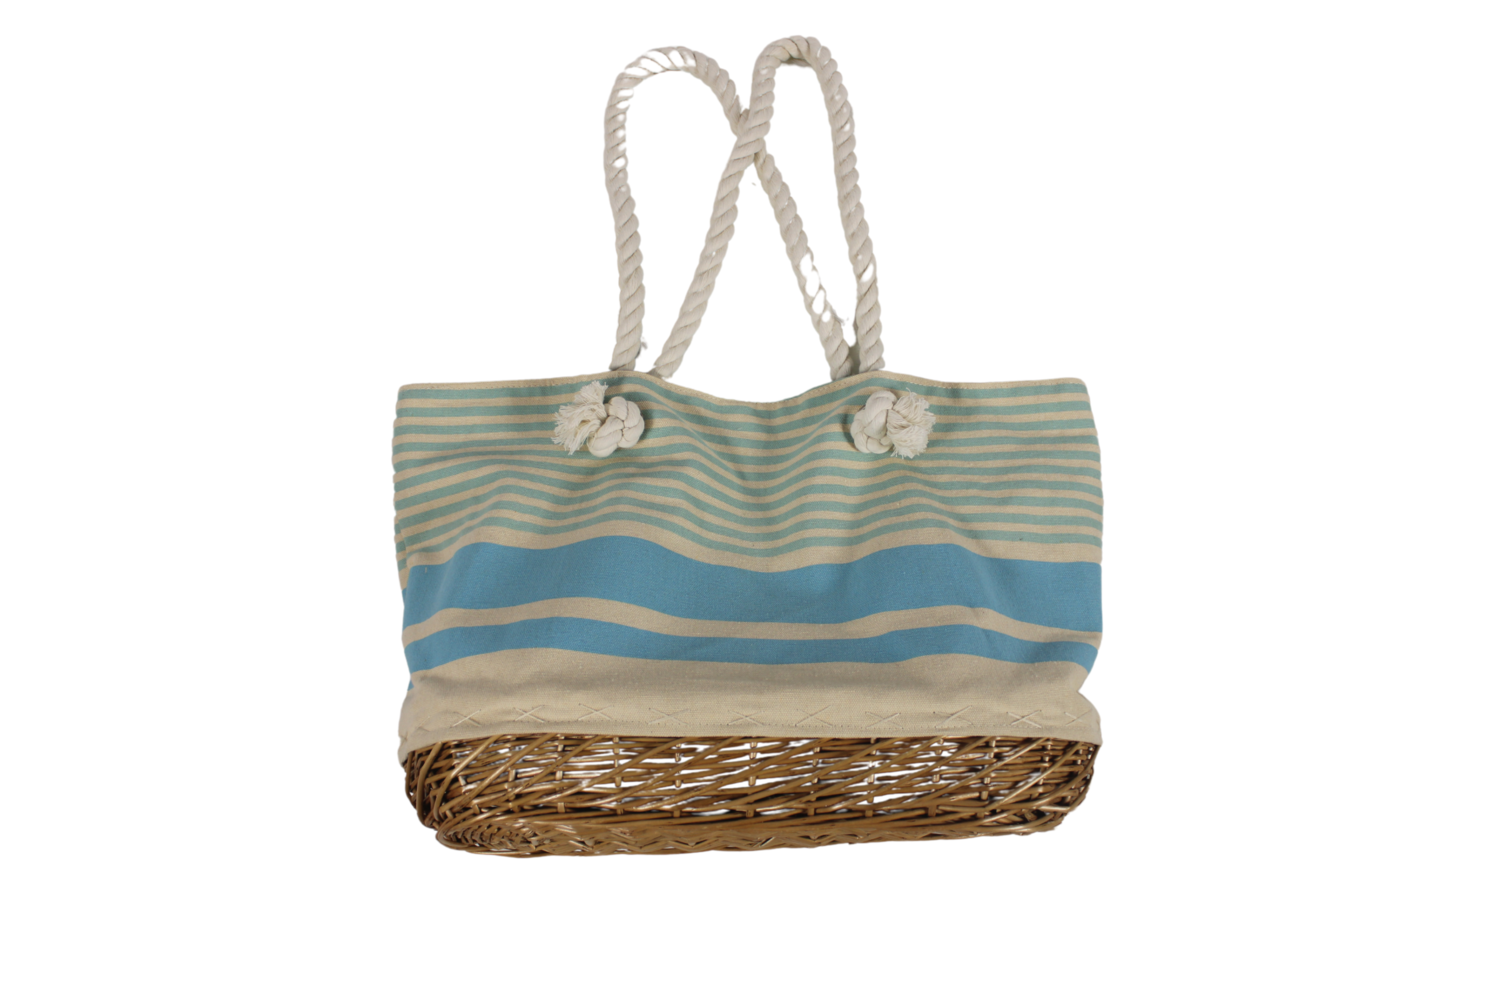 Ropes and Stripes Tote w/Basket Bottom